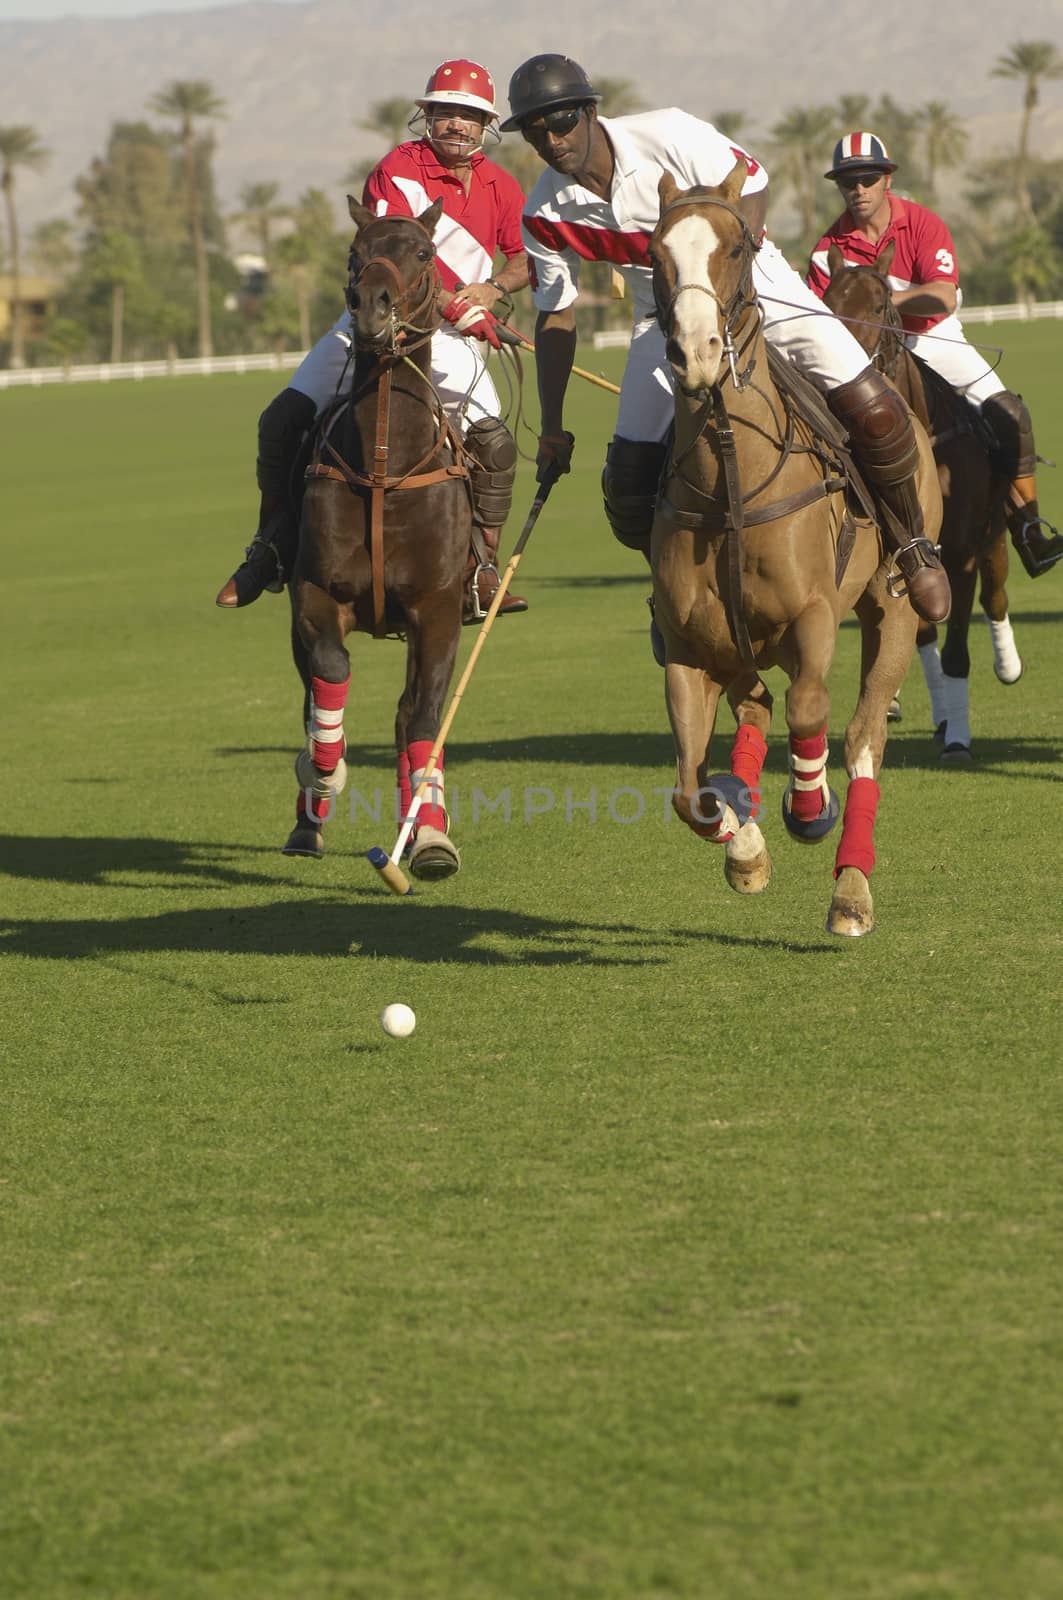 Three polo players in action during tournament by moodboard